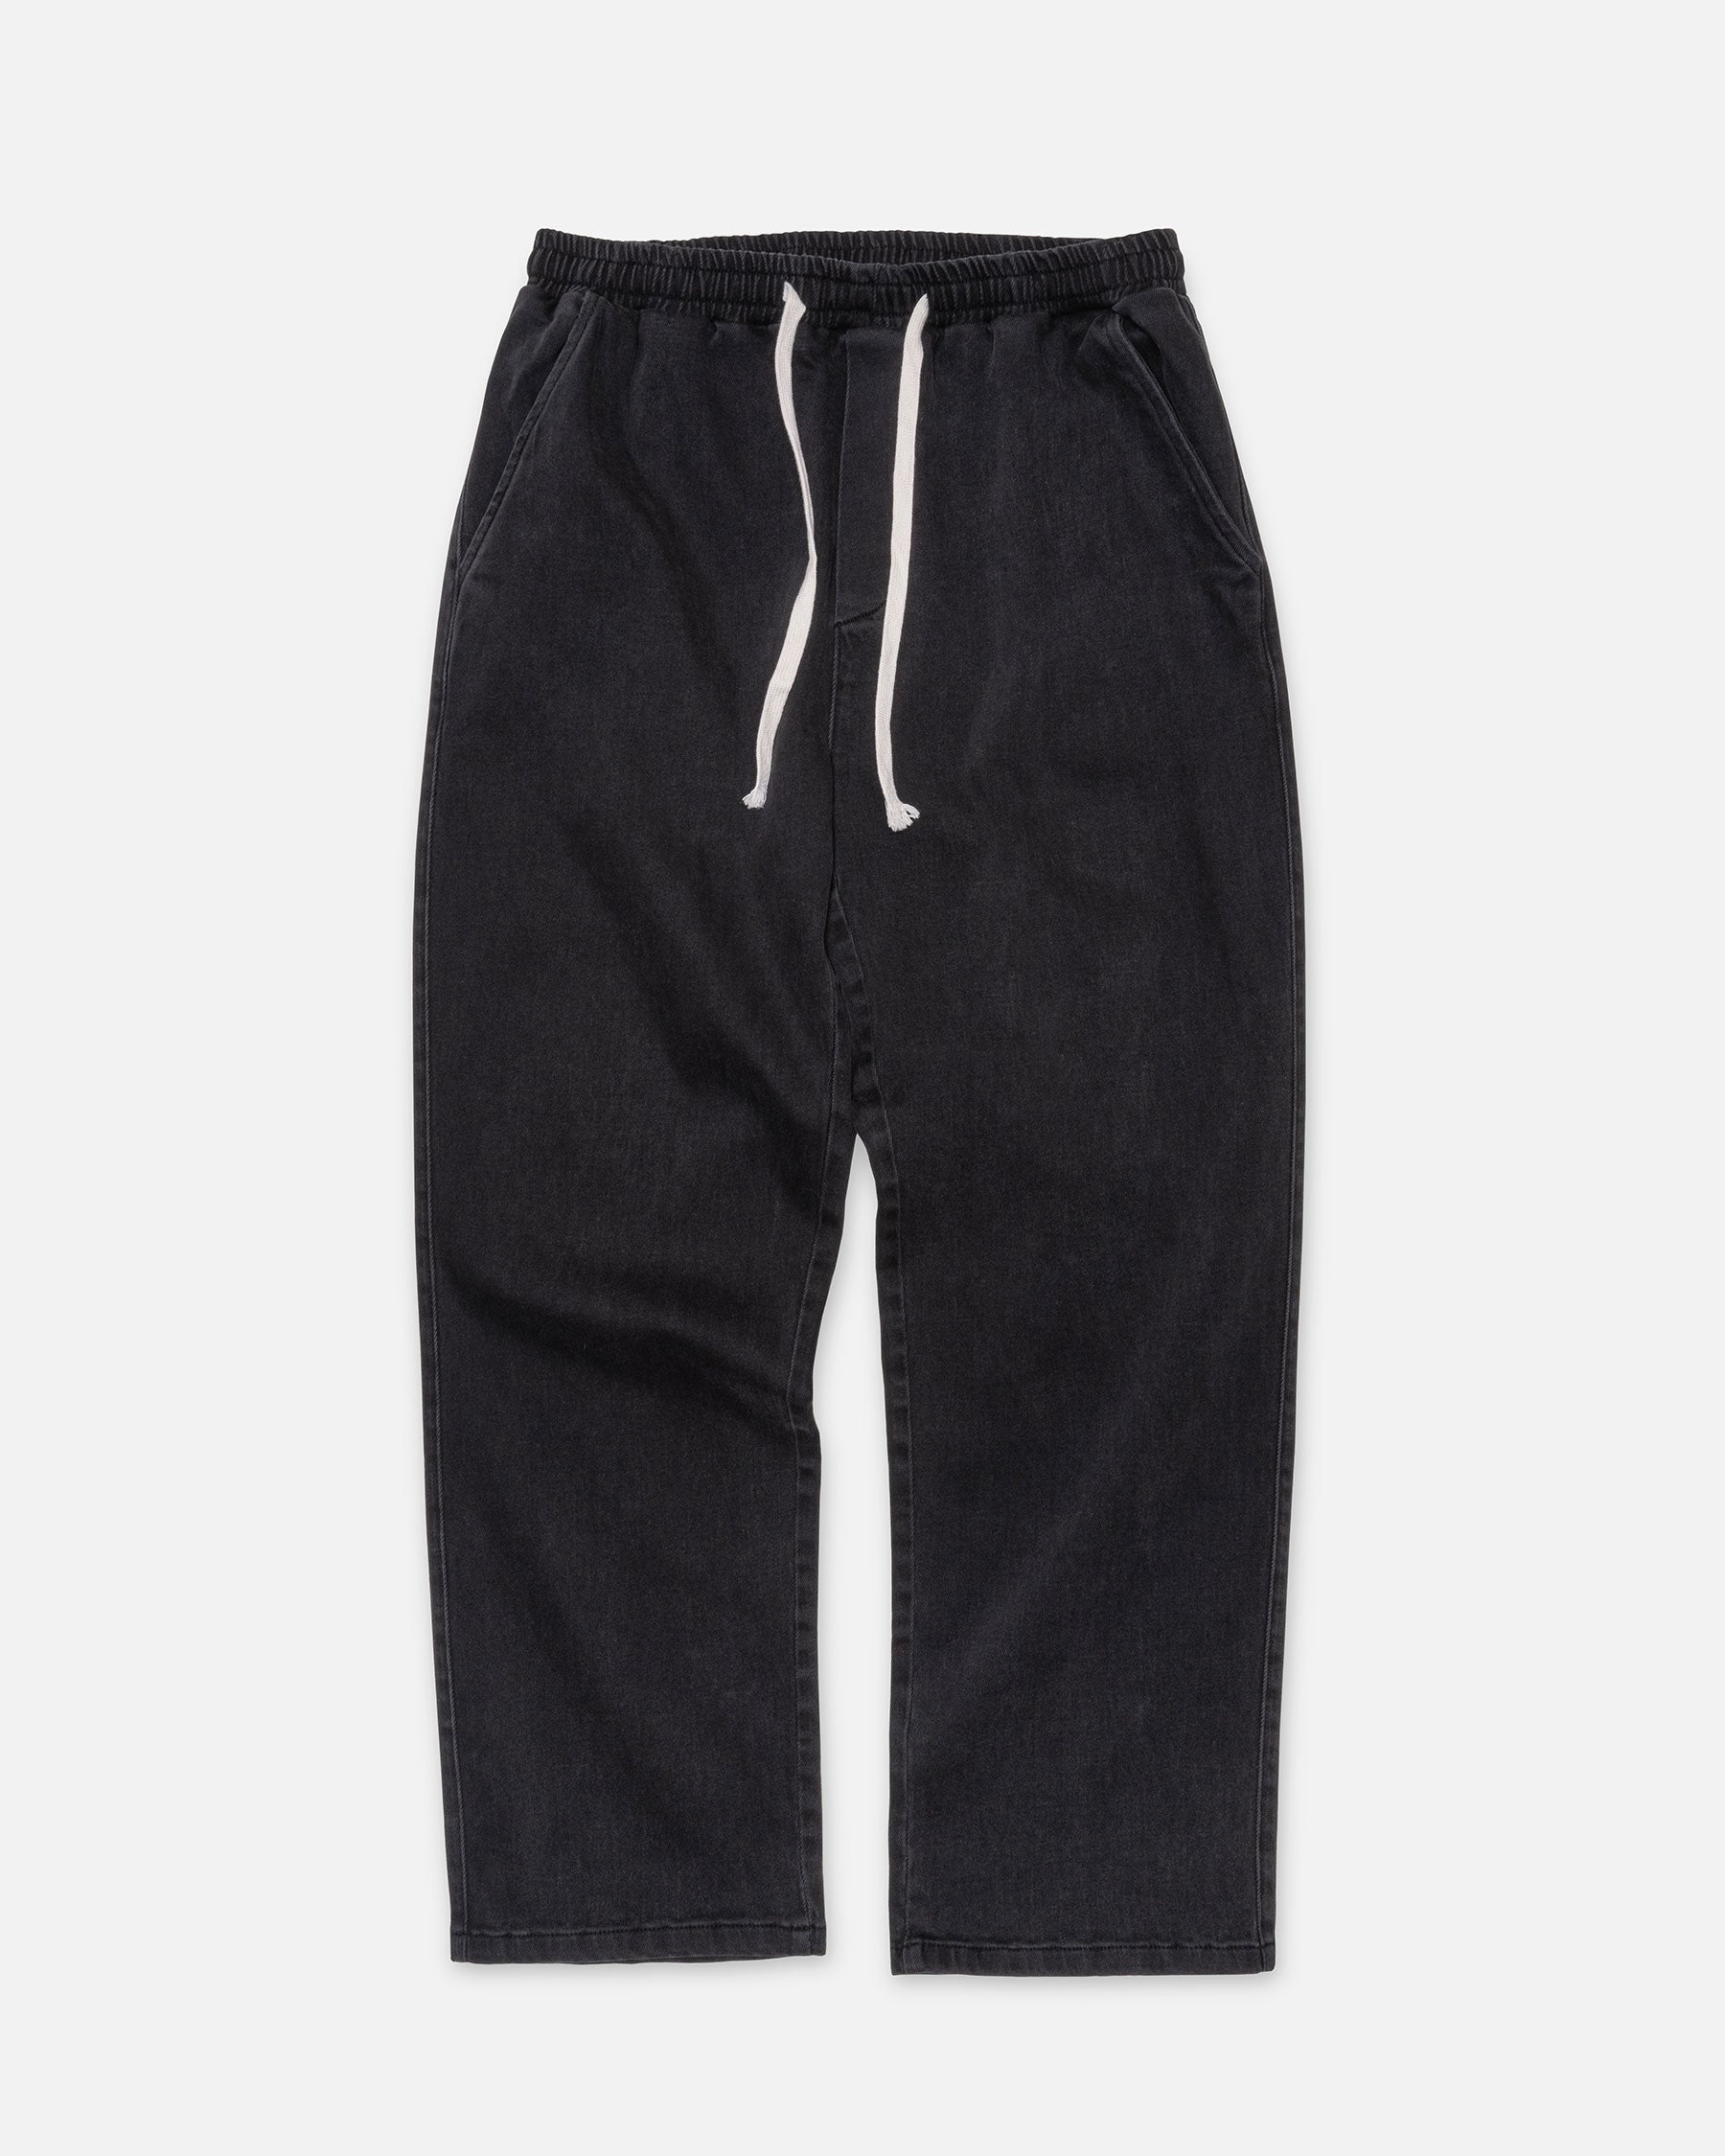 K-LOOSE TROUSERS - BLACK / FRONT